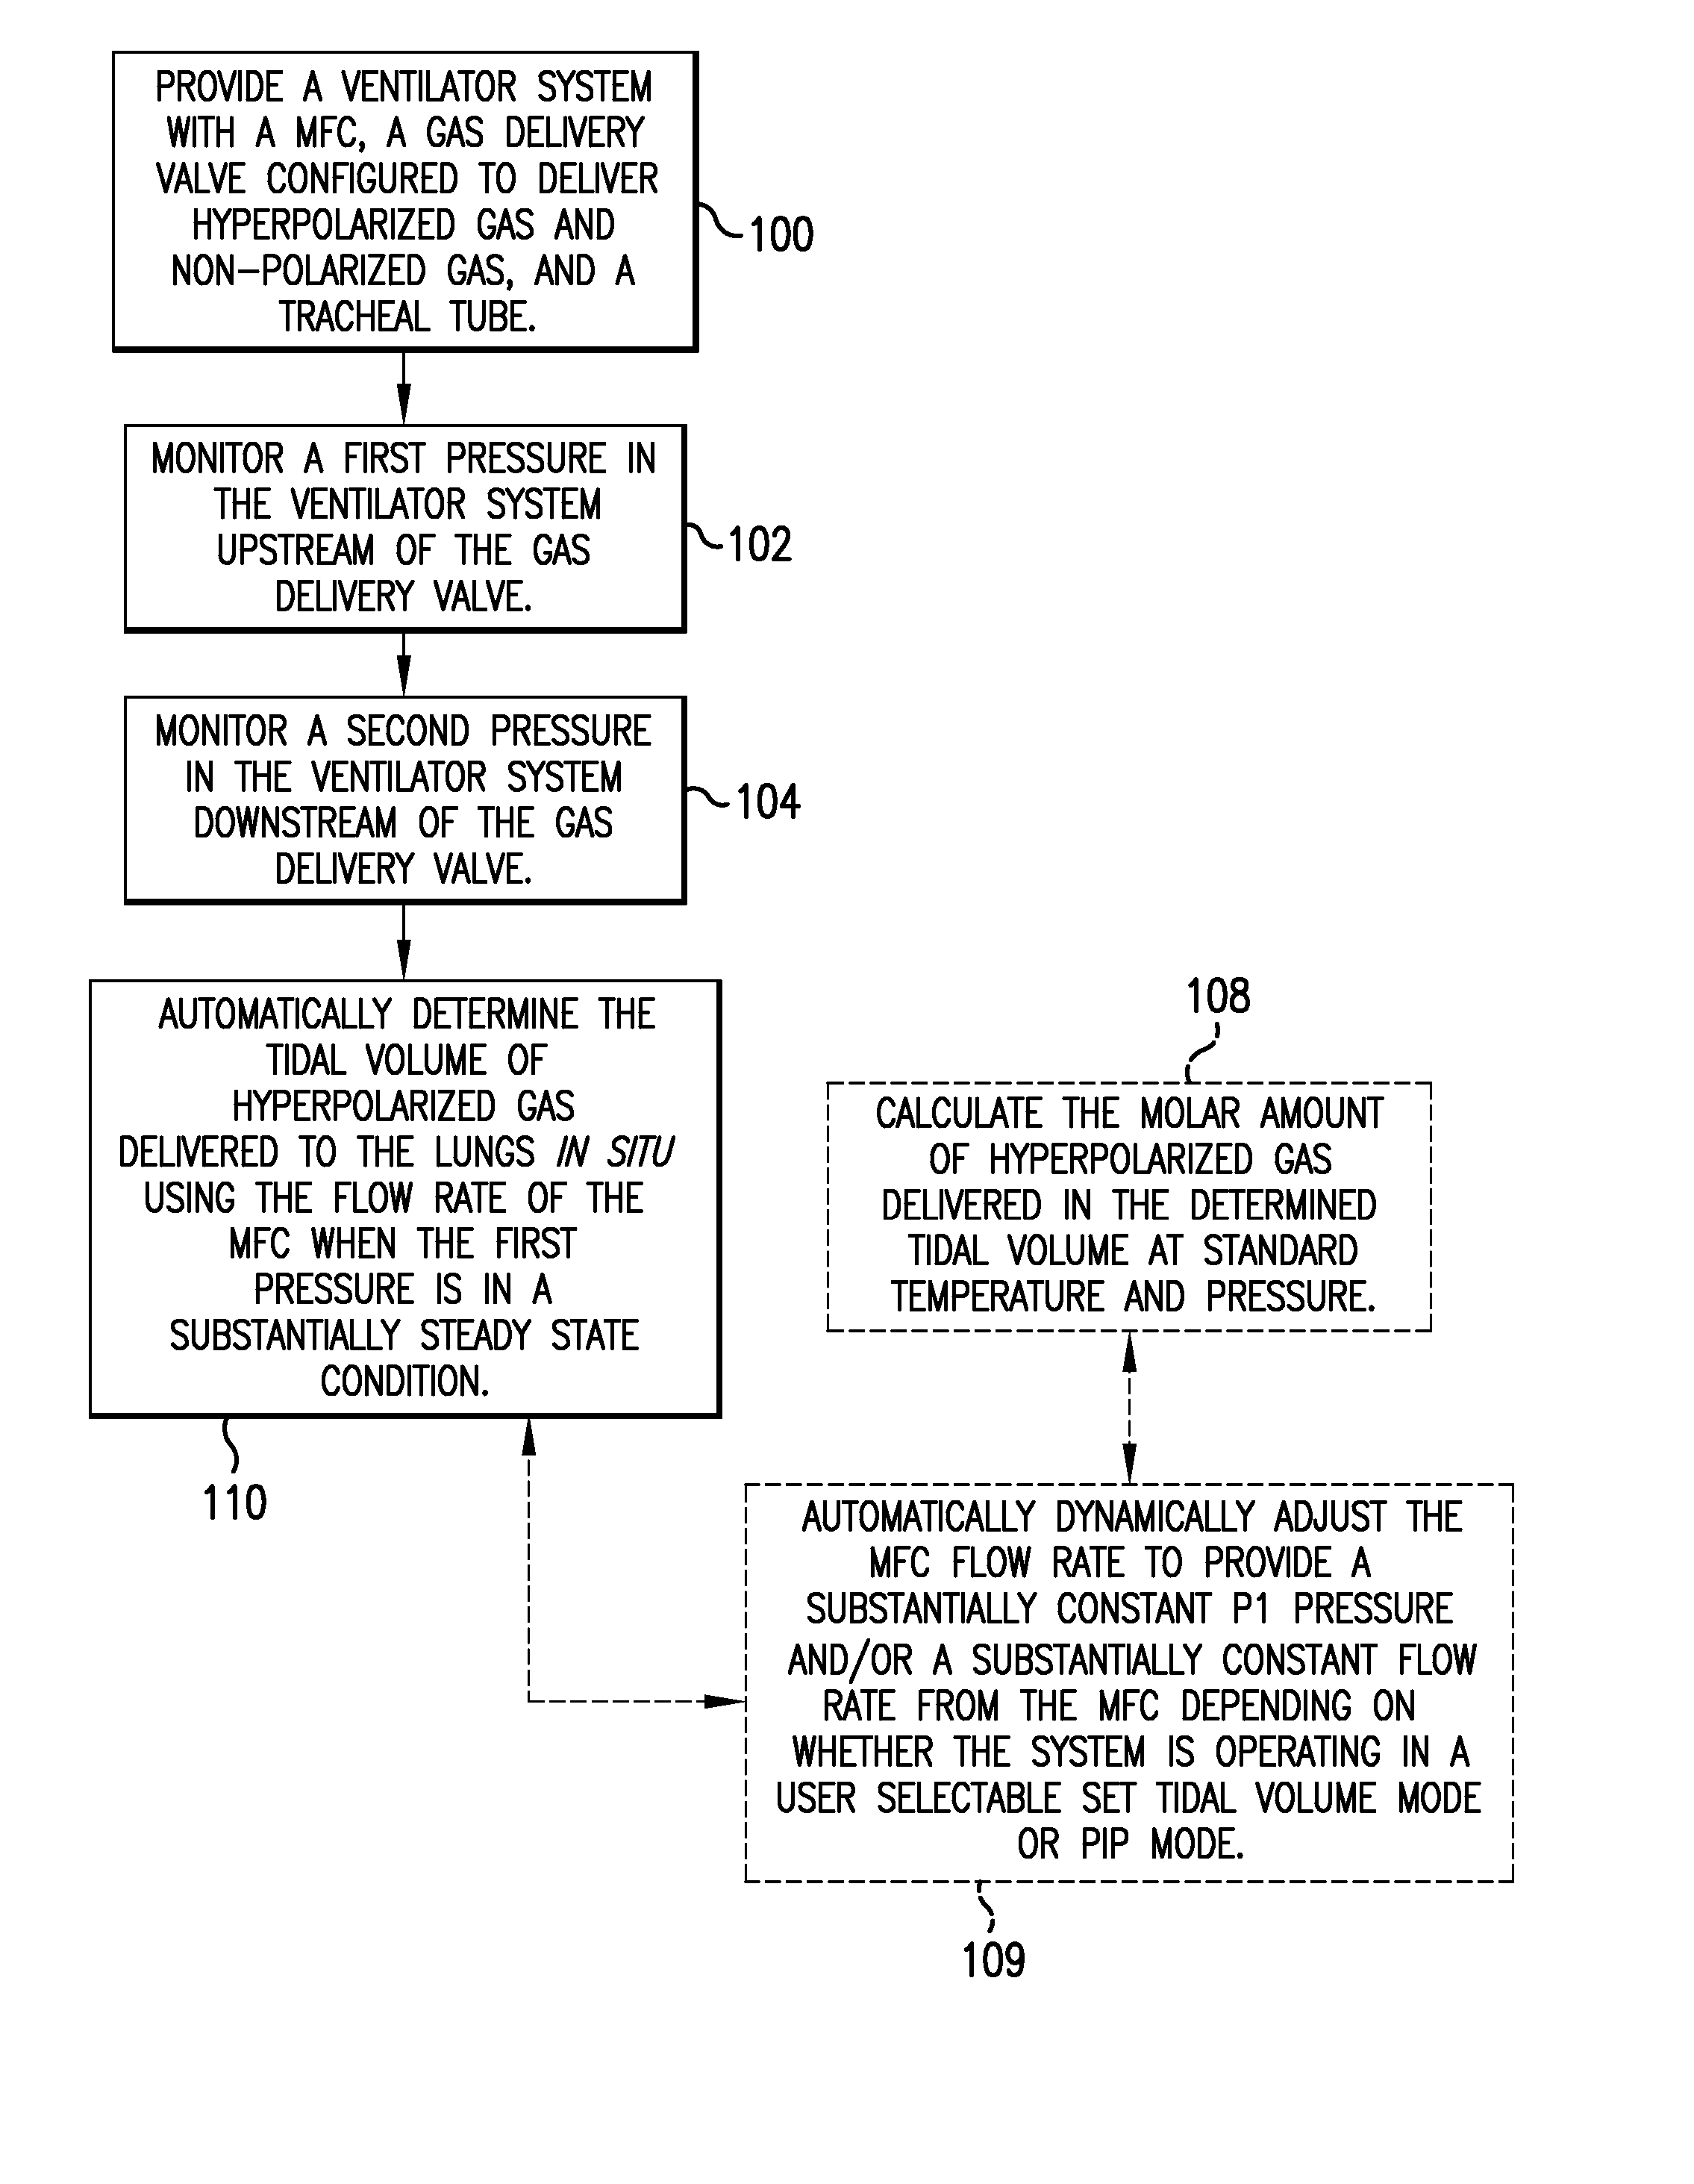 Mri/nmr-compatible, tidal volume control and measurement systems, methods, and devices for respiratory and hyperpolarized gas delivery